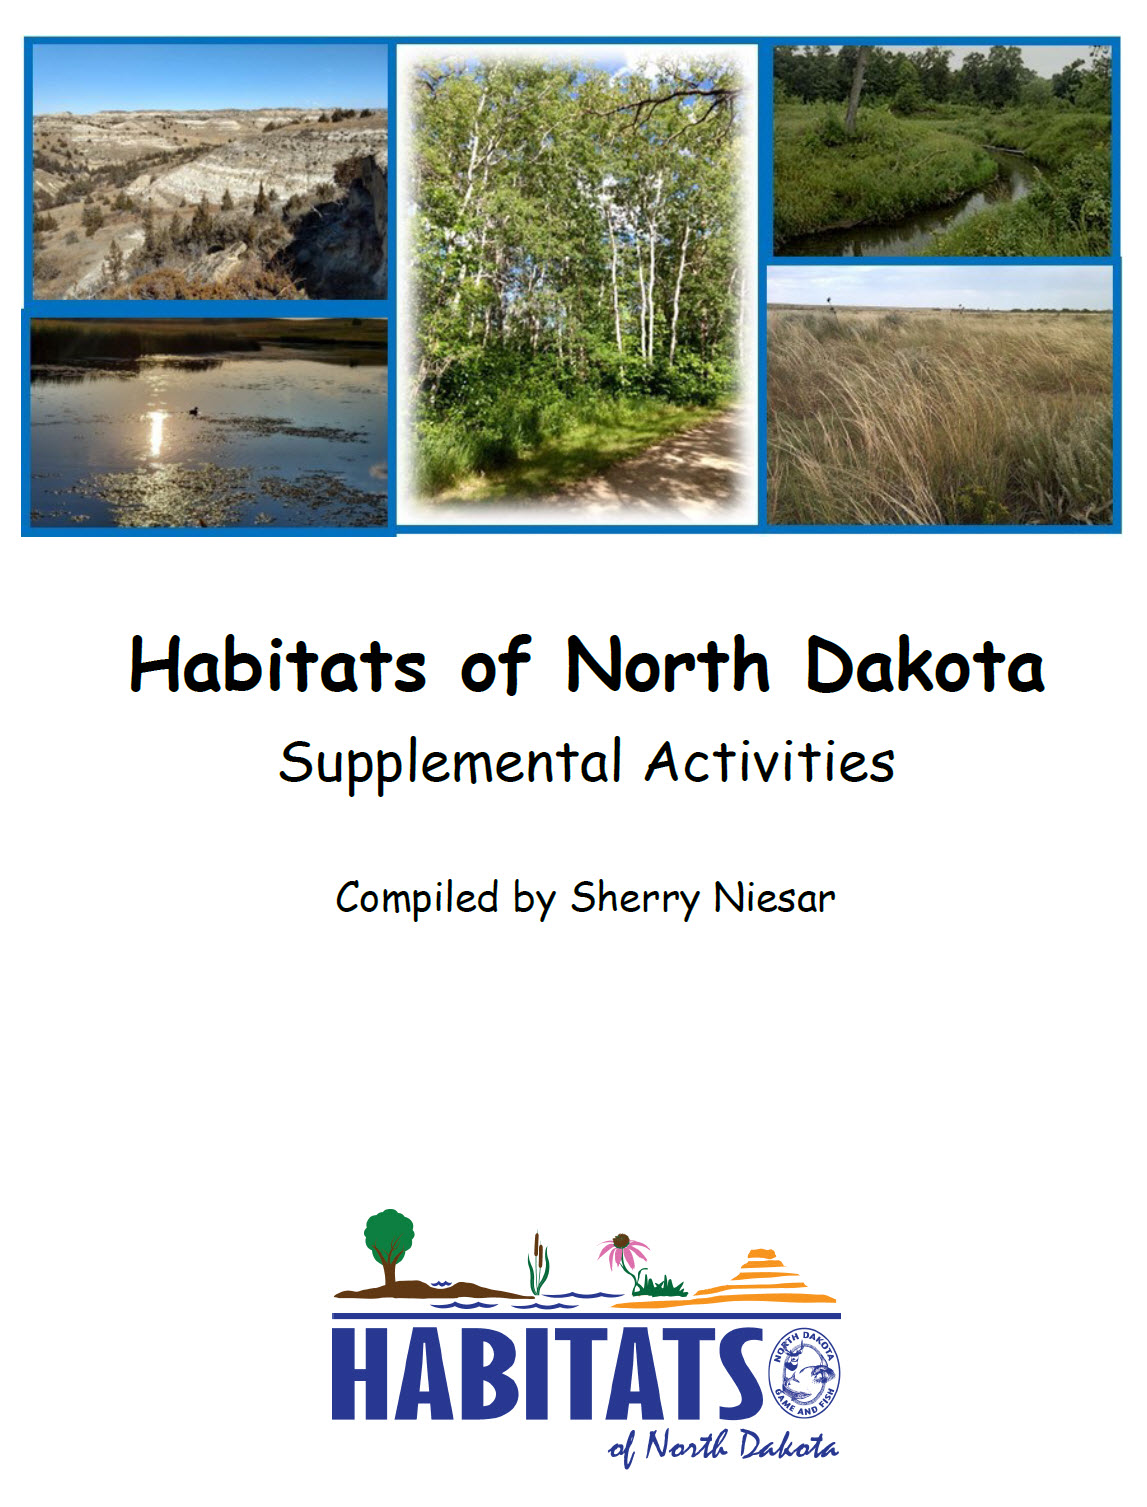 Supplemental Activities Guide Cover